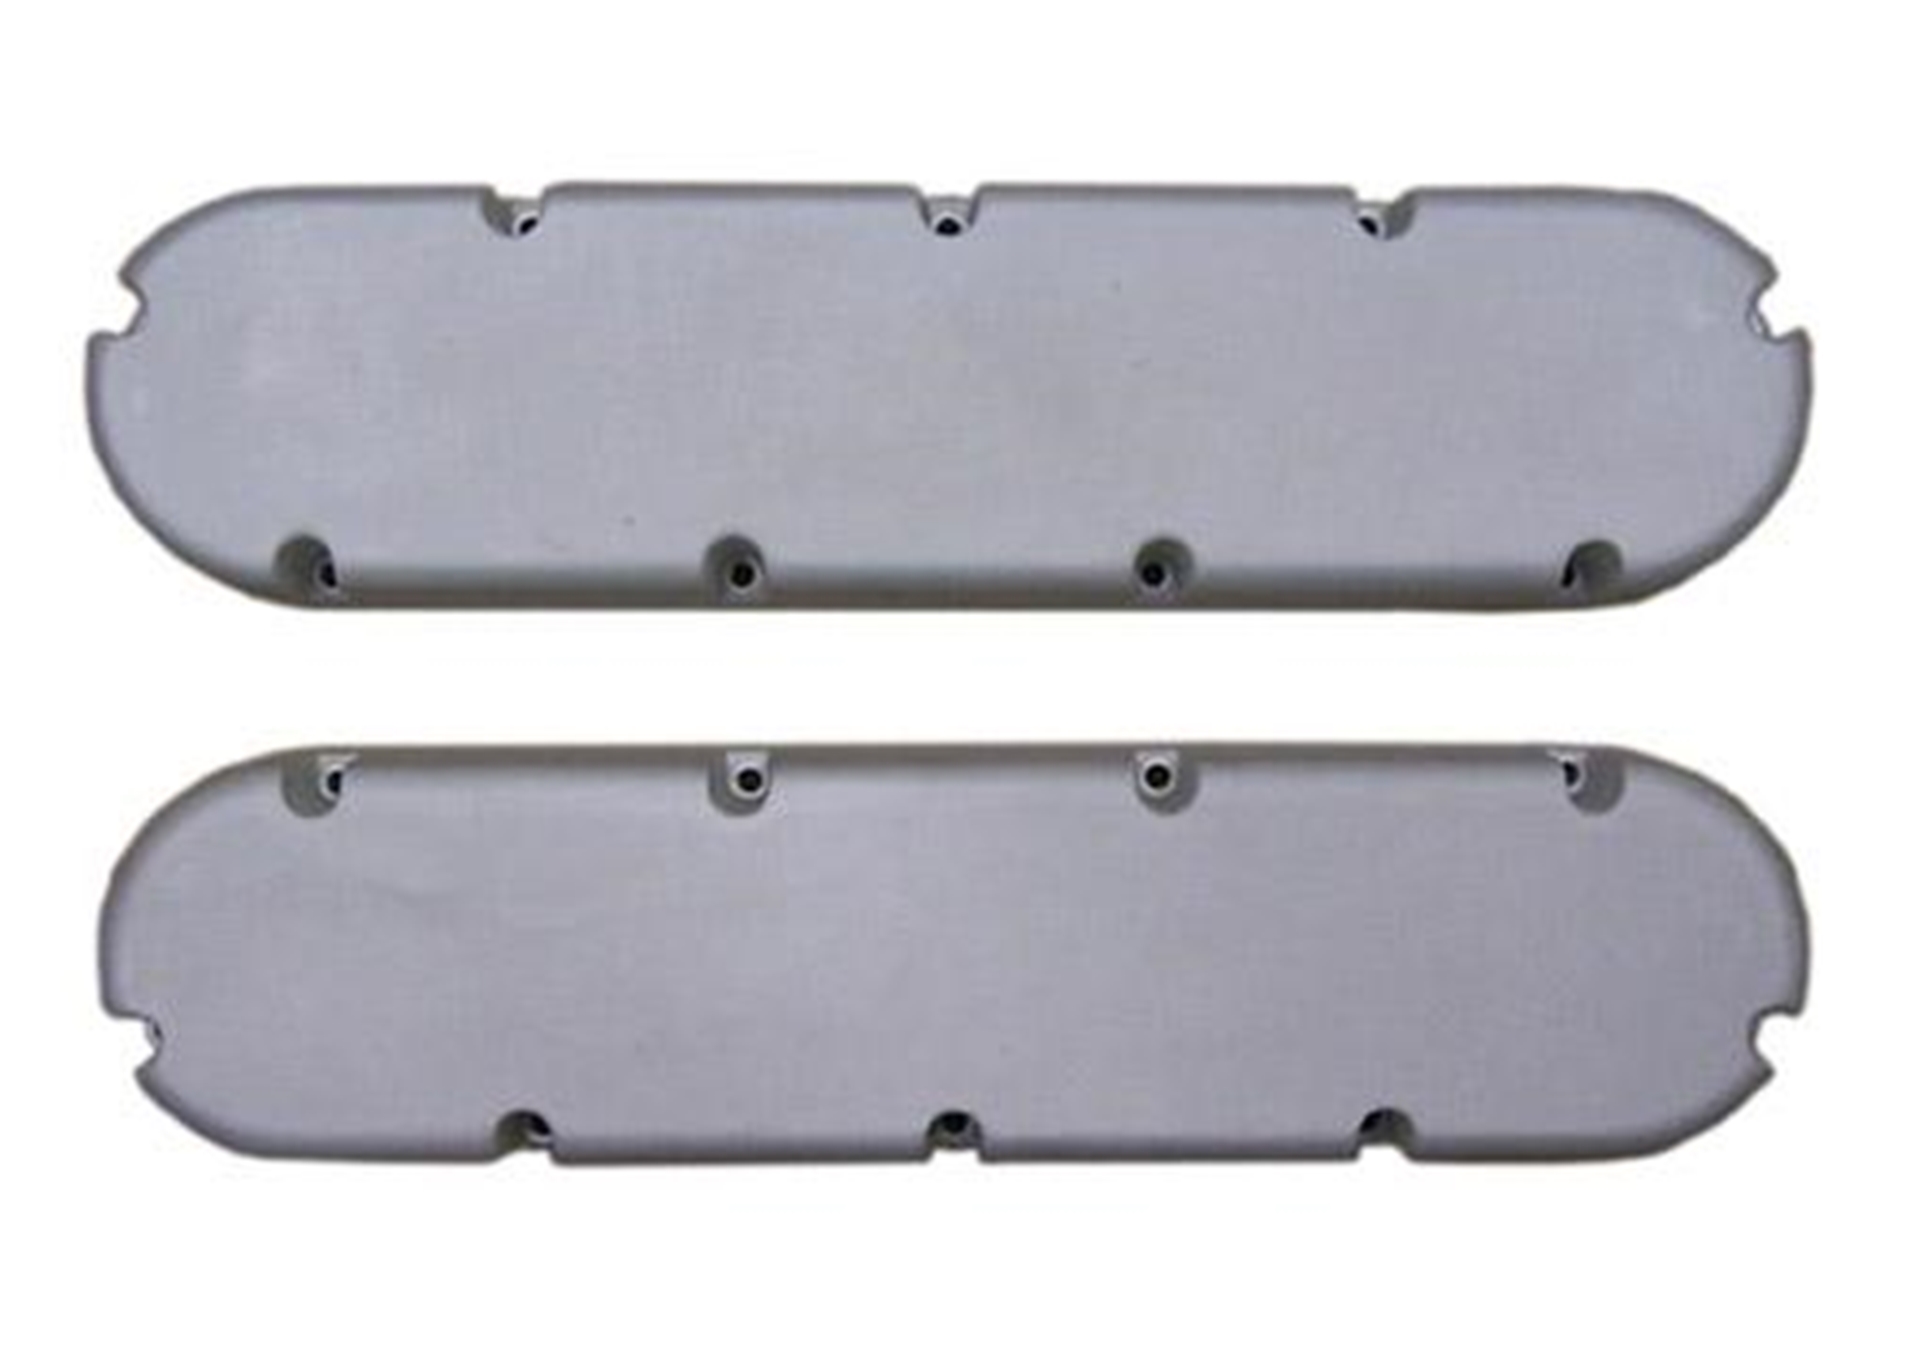 CADILLAC 368, 425, 472, & 500 Flat Top Style Valve Covers